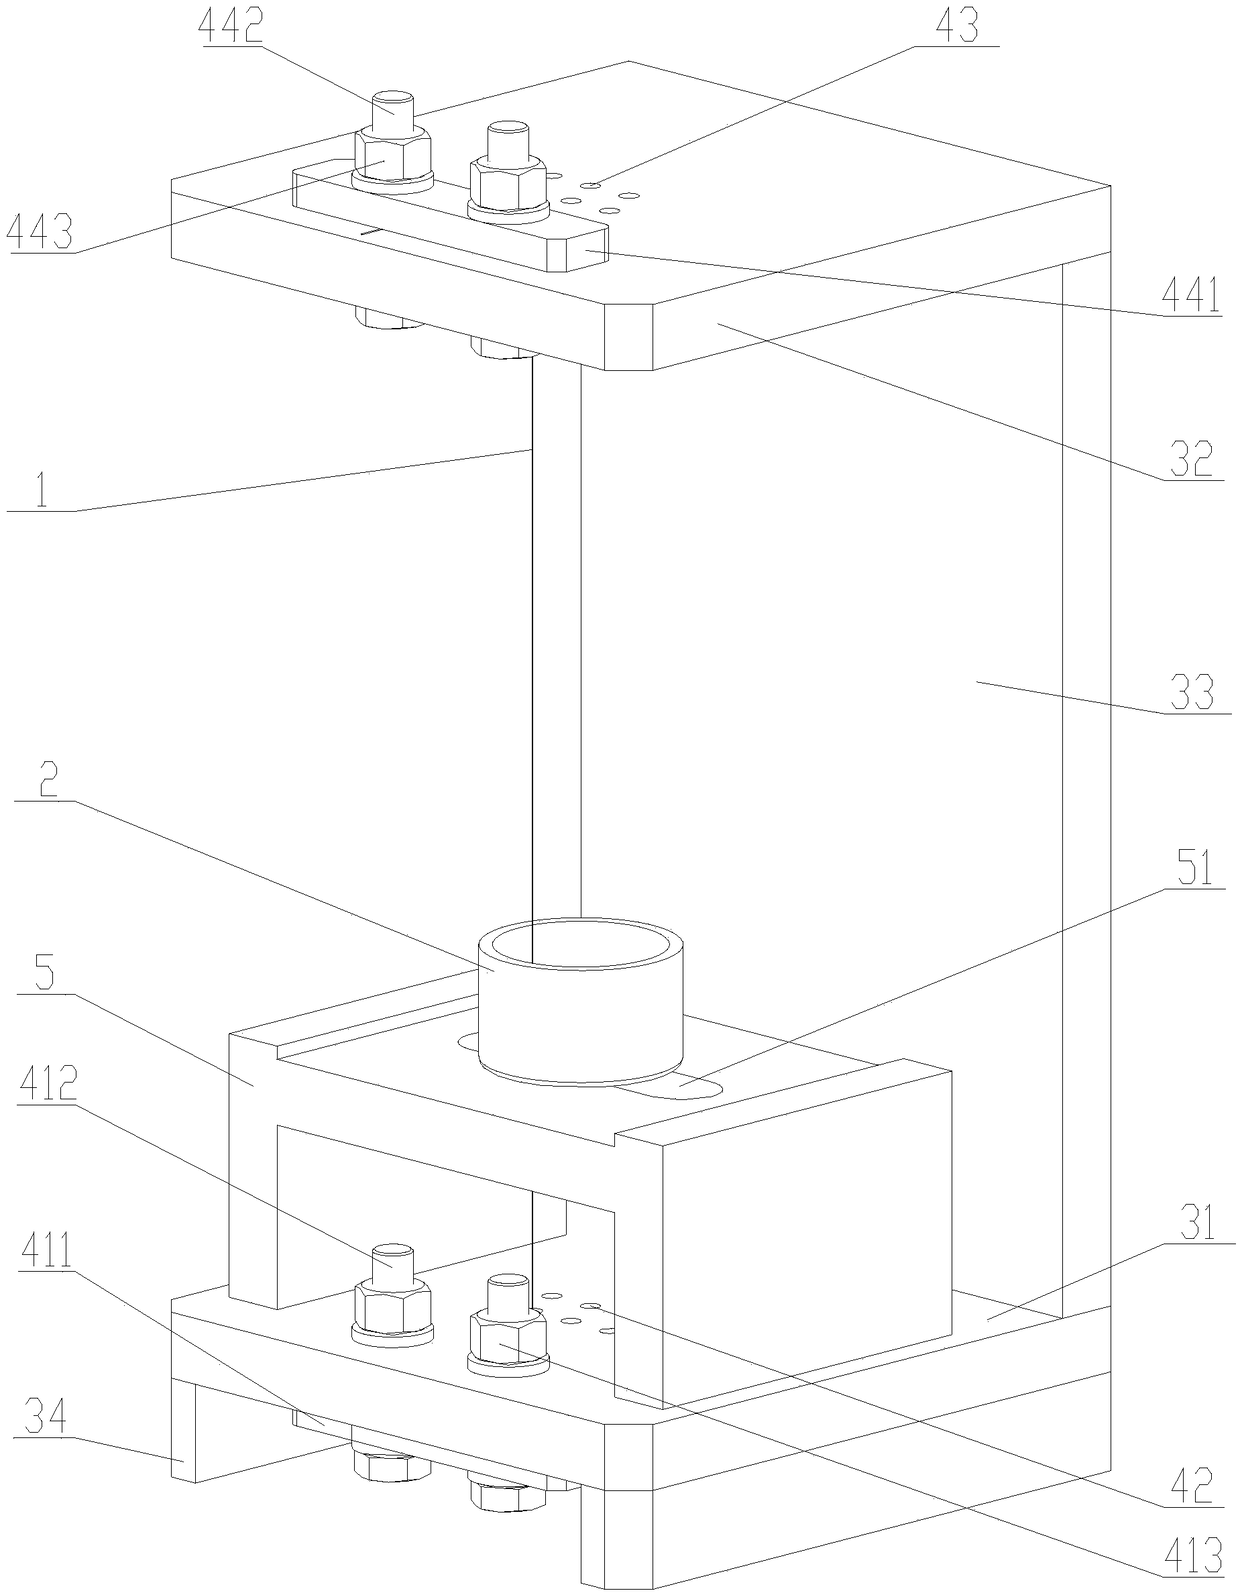 Gold phase sample fabrication device and method of diamond wire